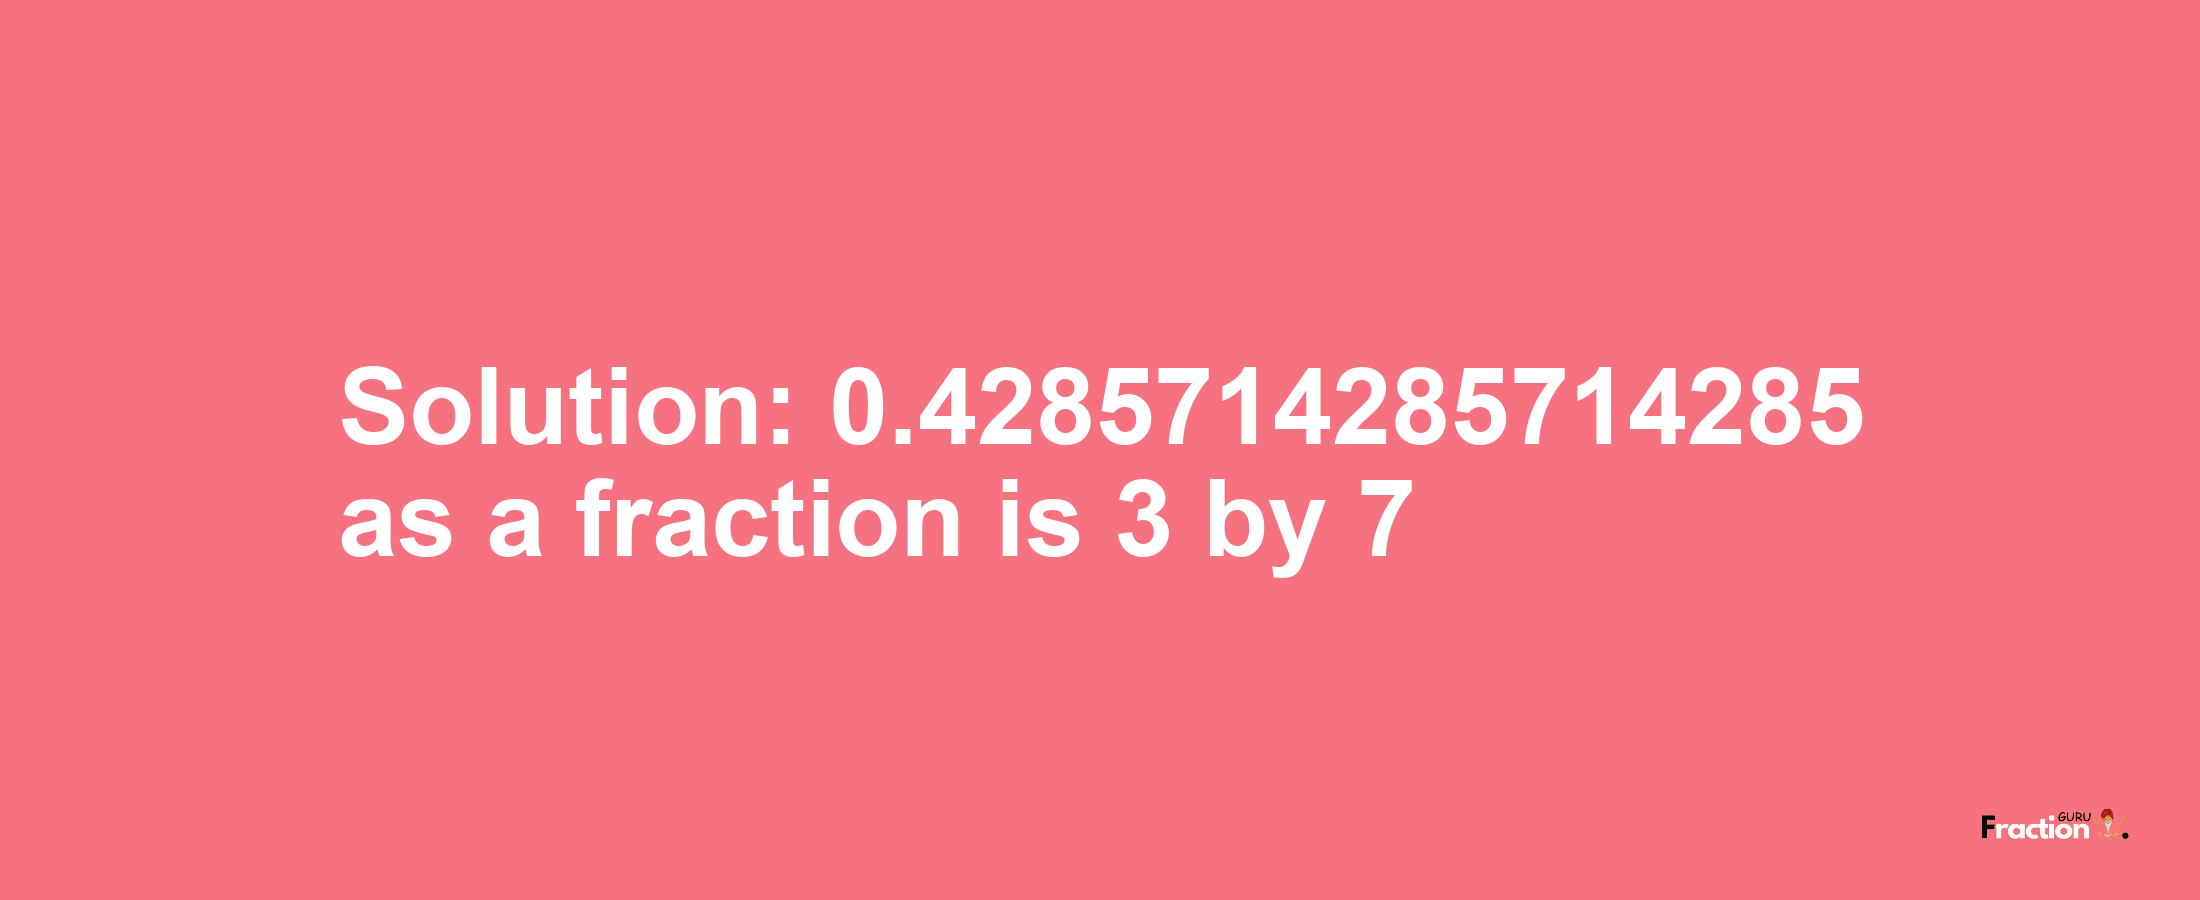 Solution:0.4285714285714285 as a fraction is 3/7